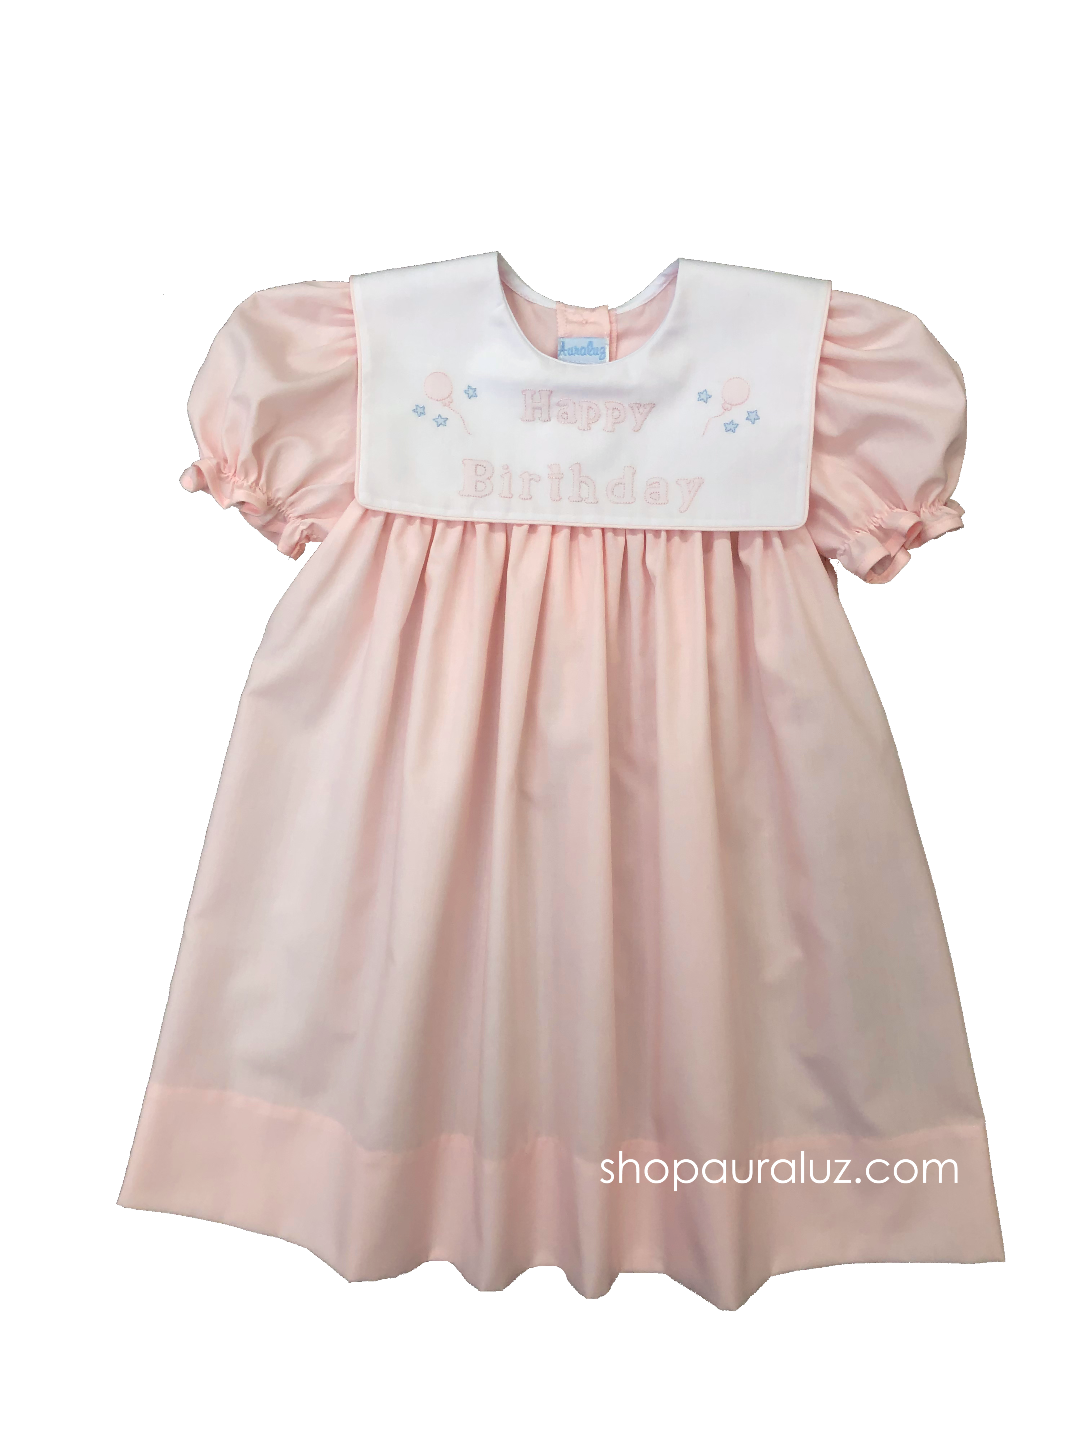 Auraluz Birthday Dress..Pink with square collar and embroidered "Happy Birthday"